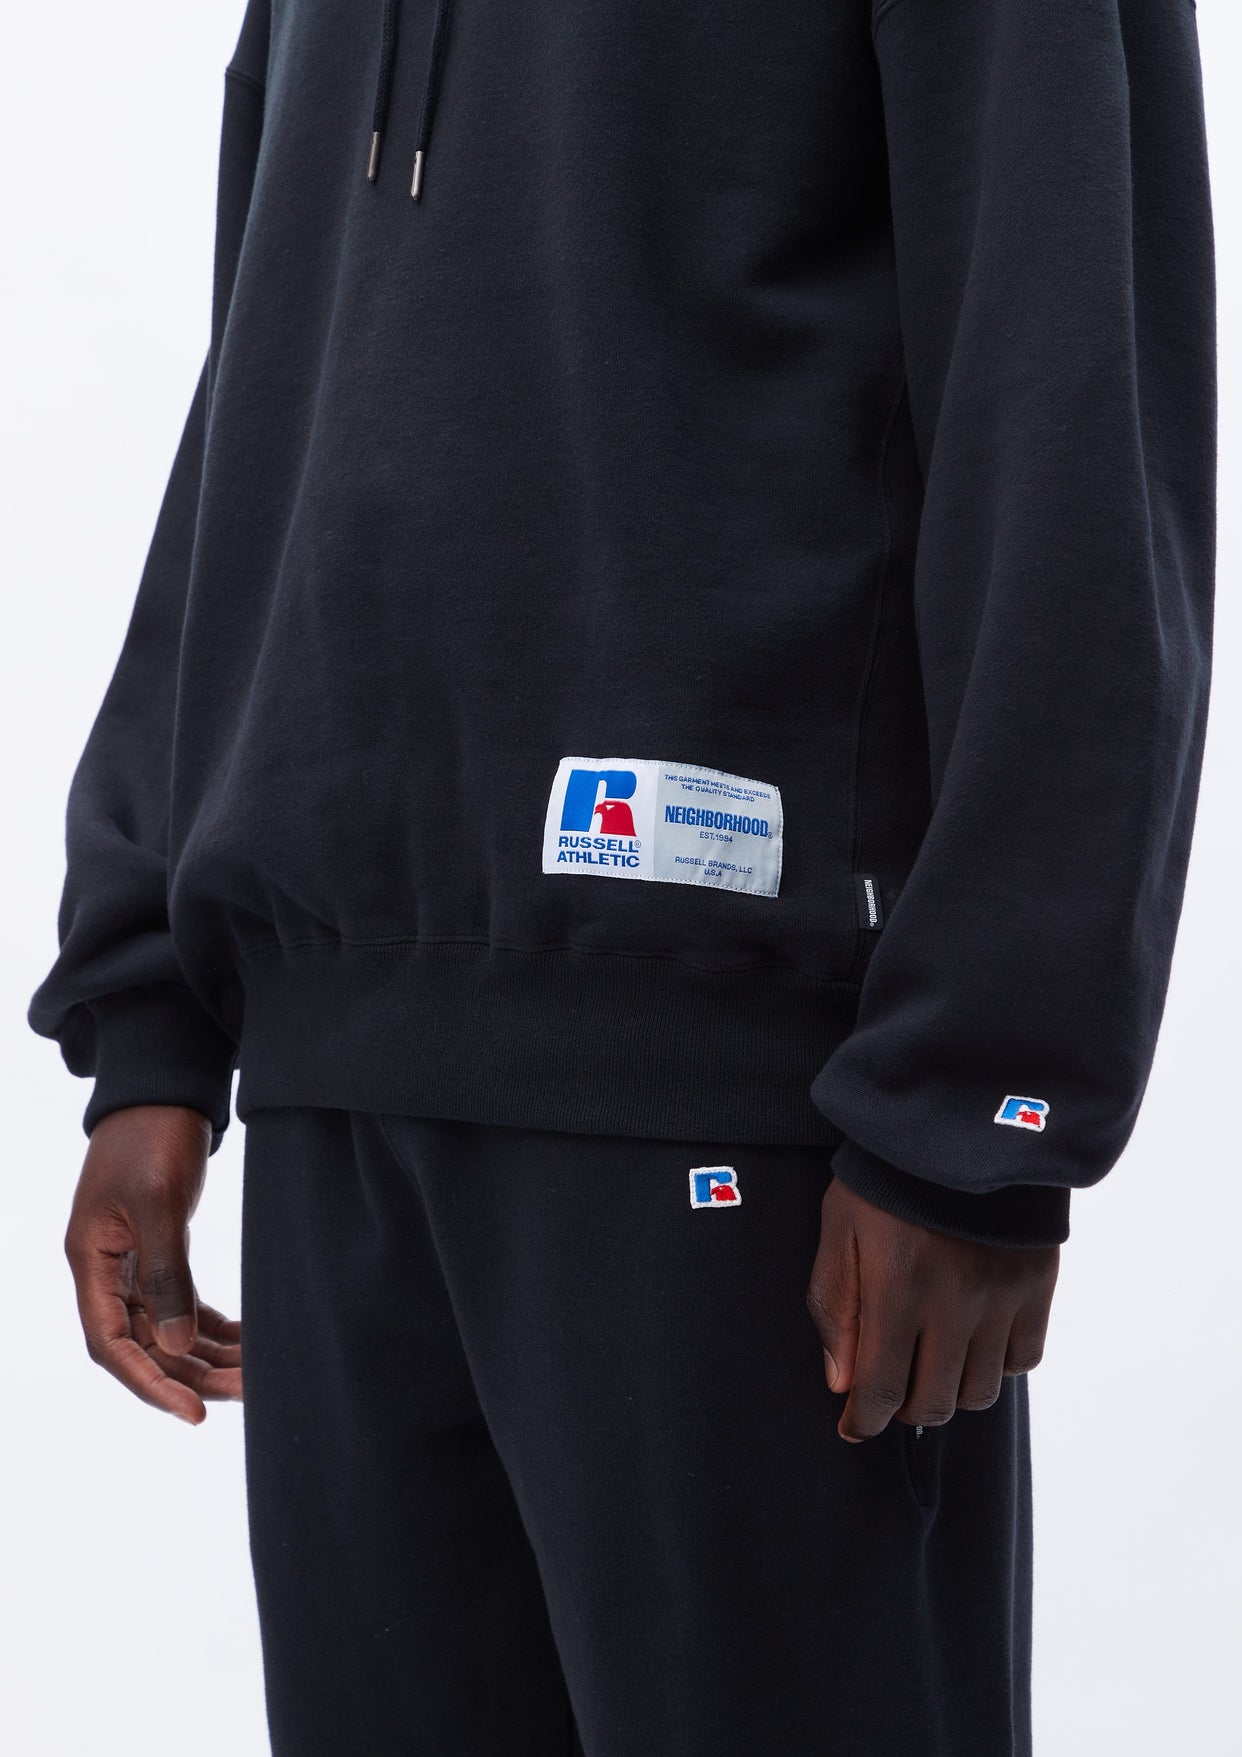 NH X RUSSELL ATHLETIC . SWEATPARKA LS